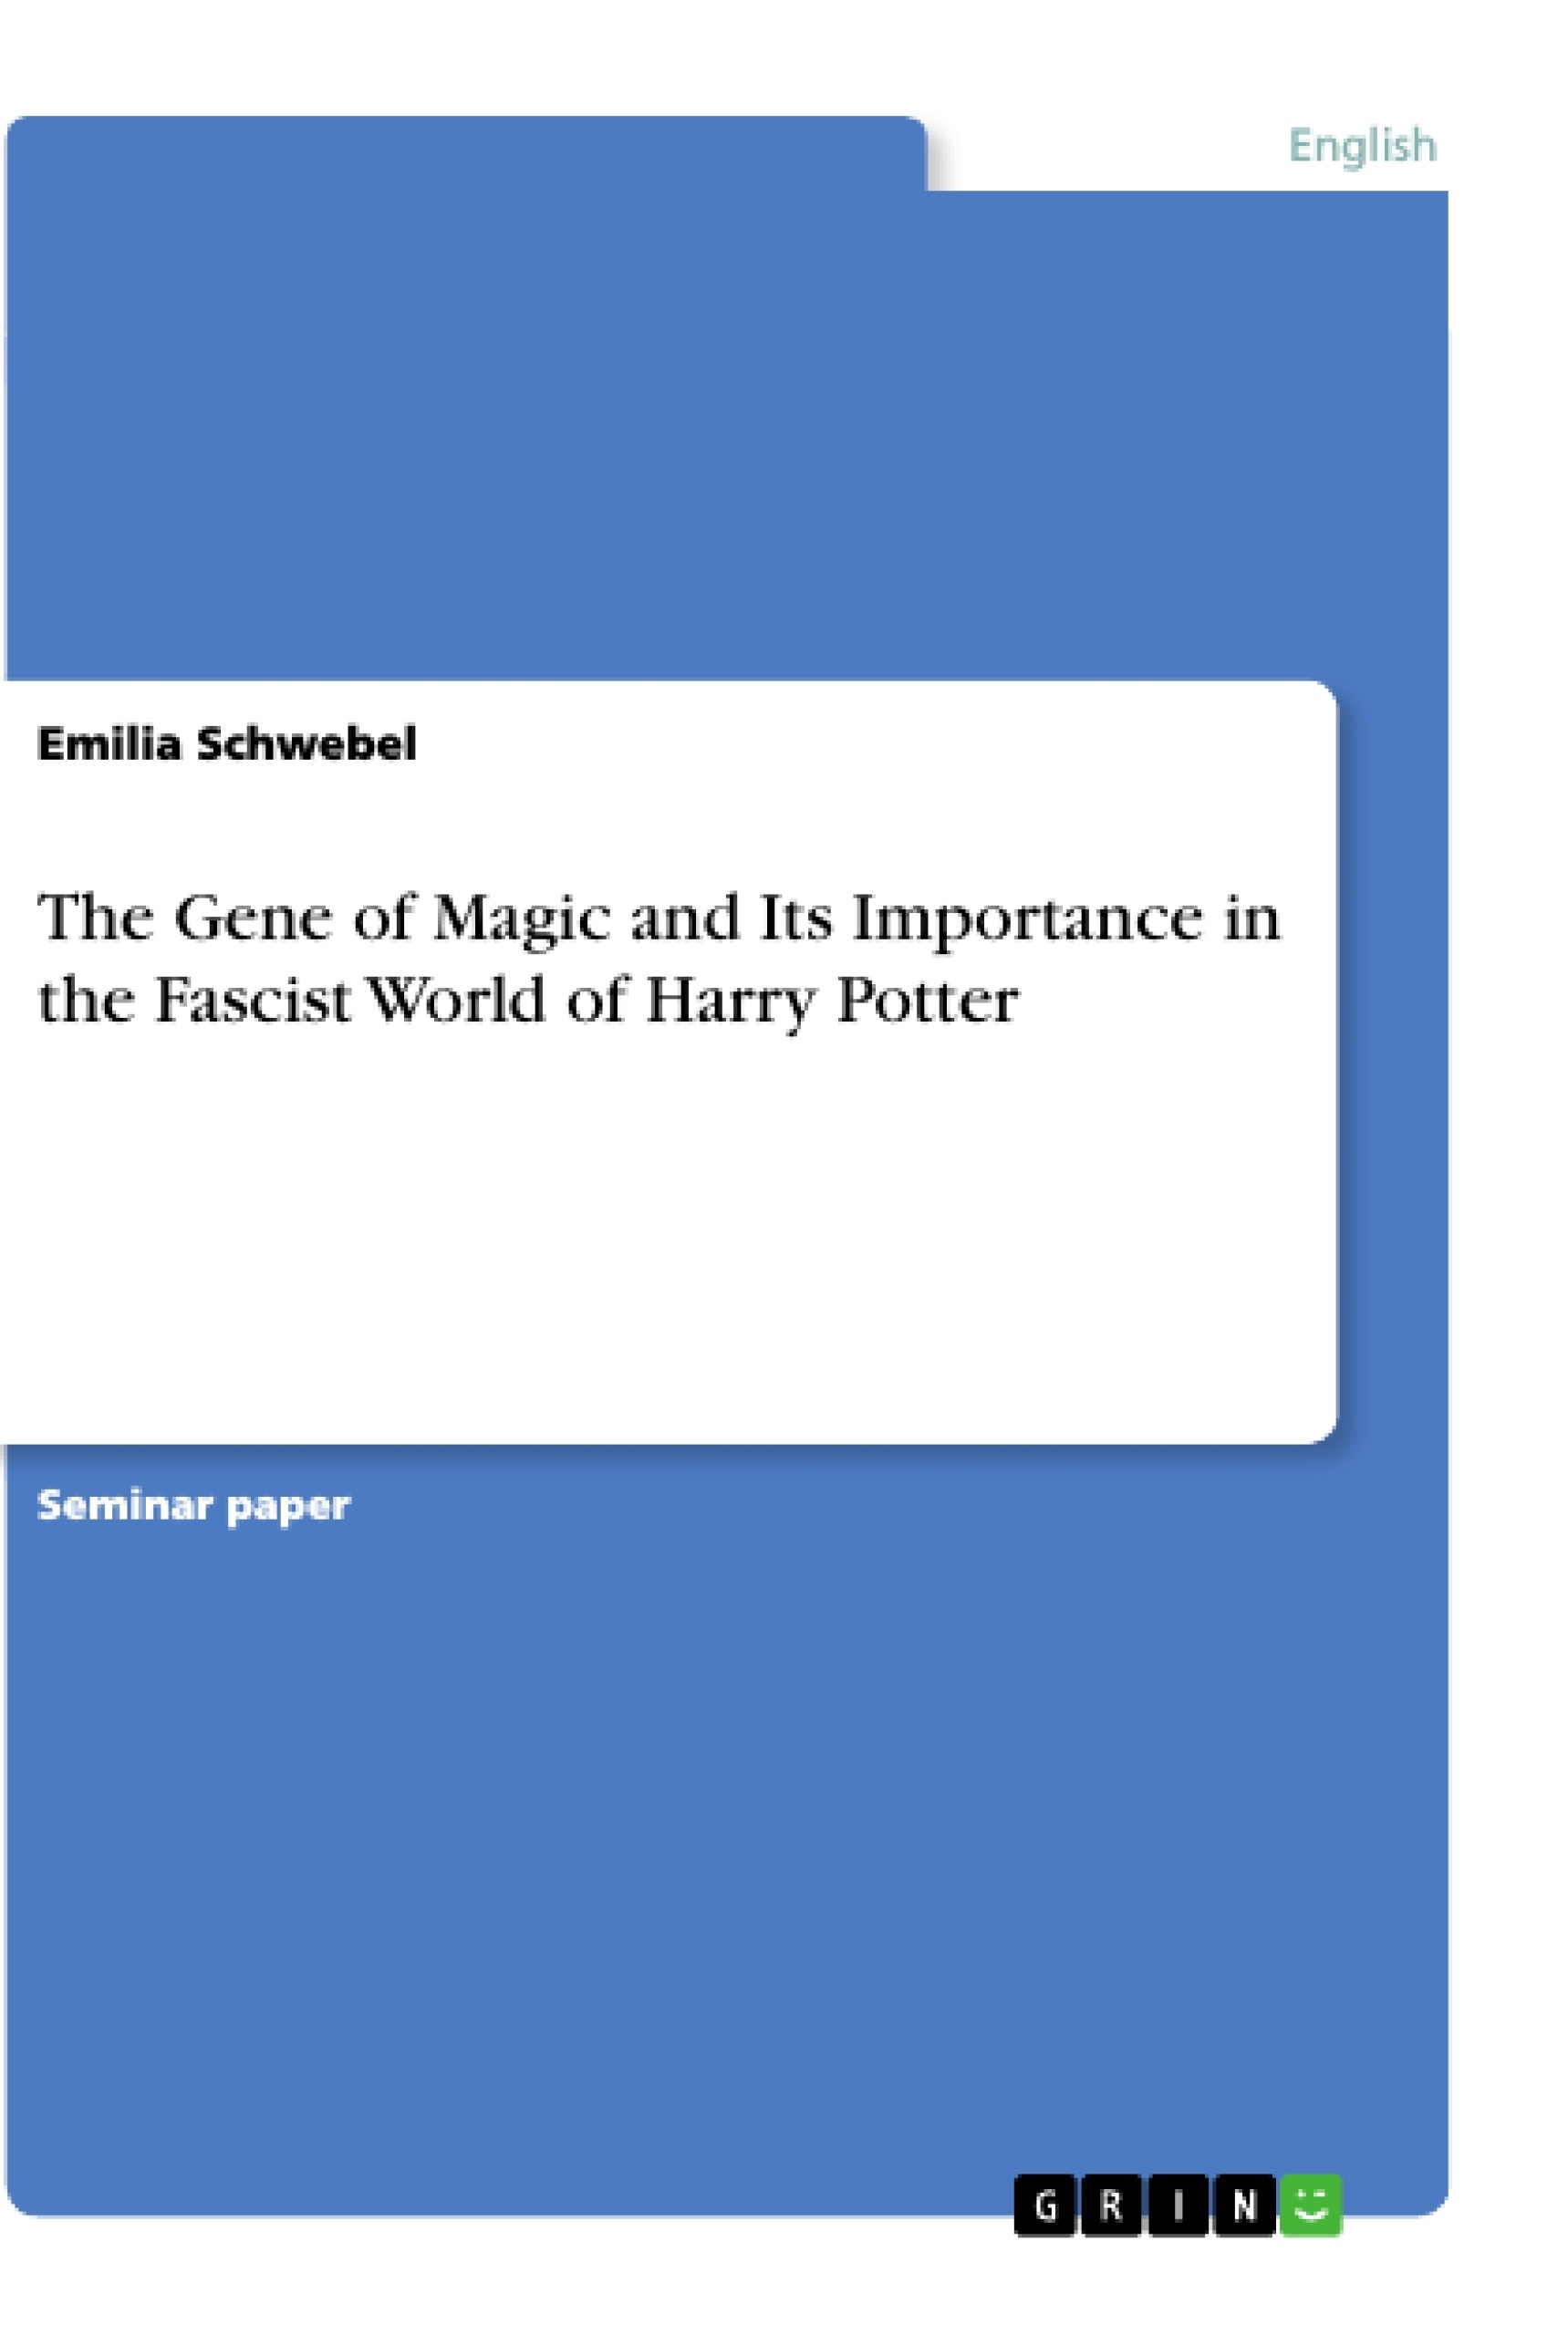 Titre: The Gene of Magic and Its Importance in the Fascist World of Harry Potter